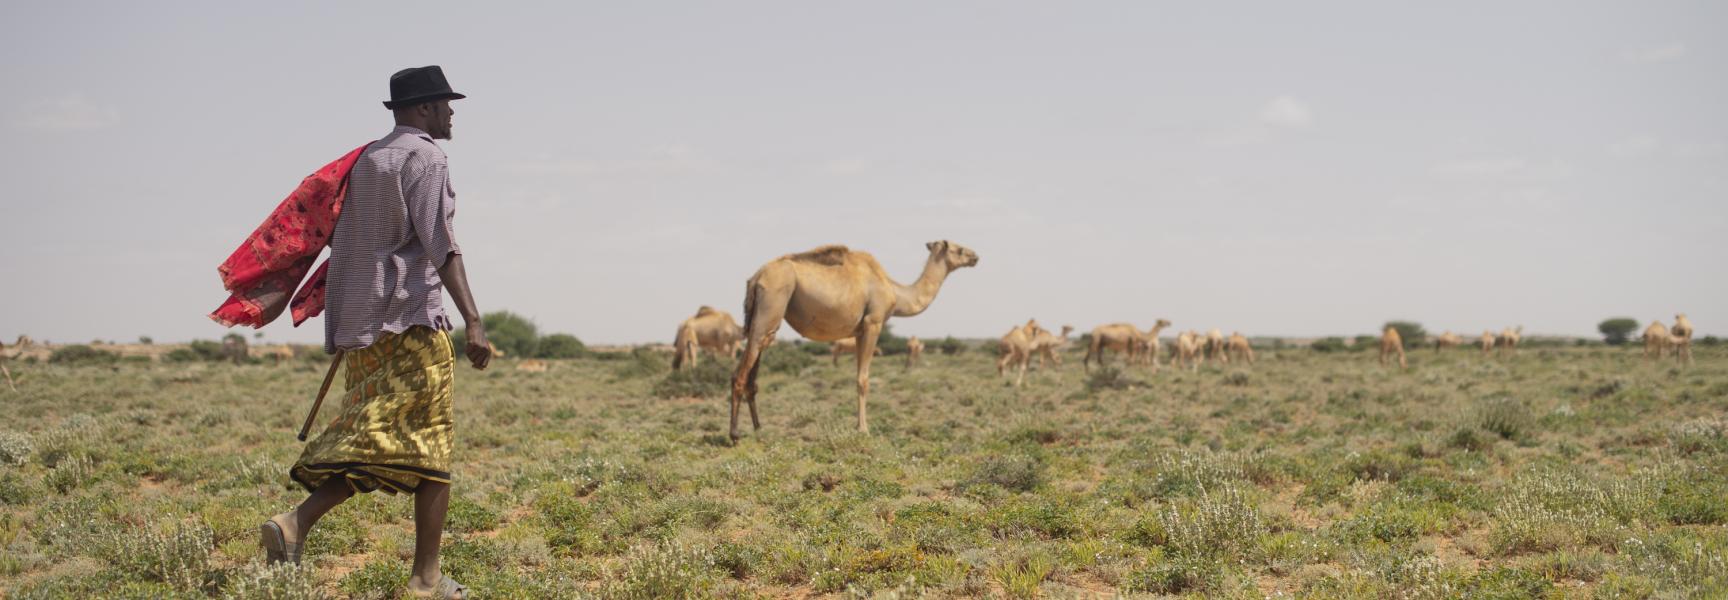 Man with herd of camels in Somalia